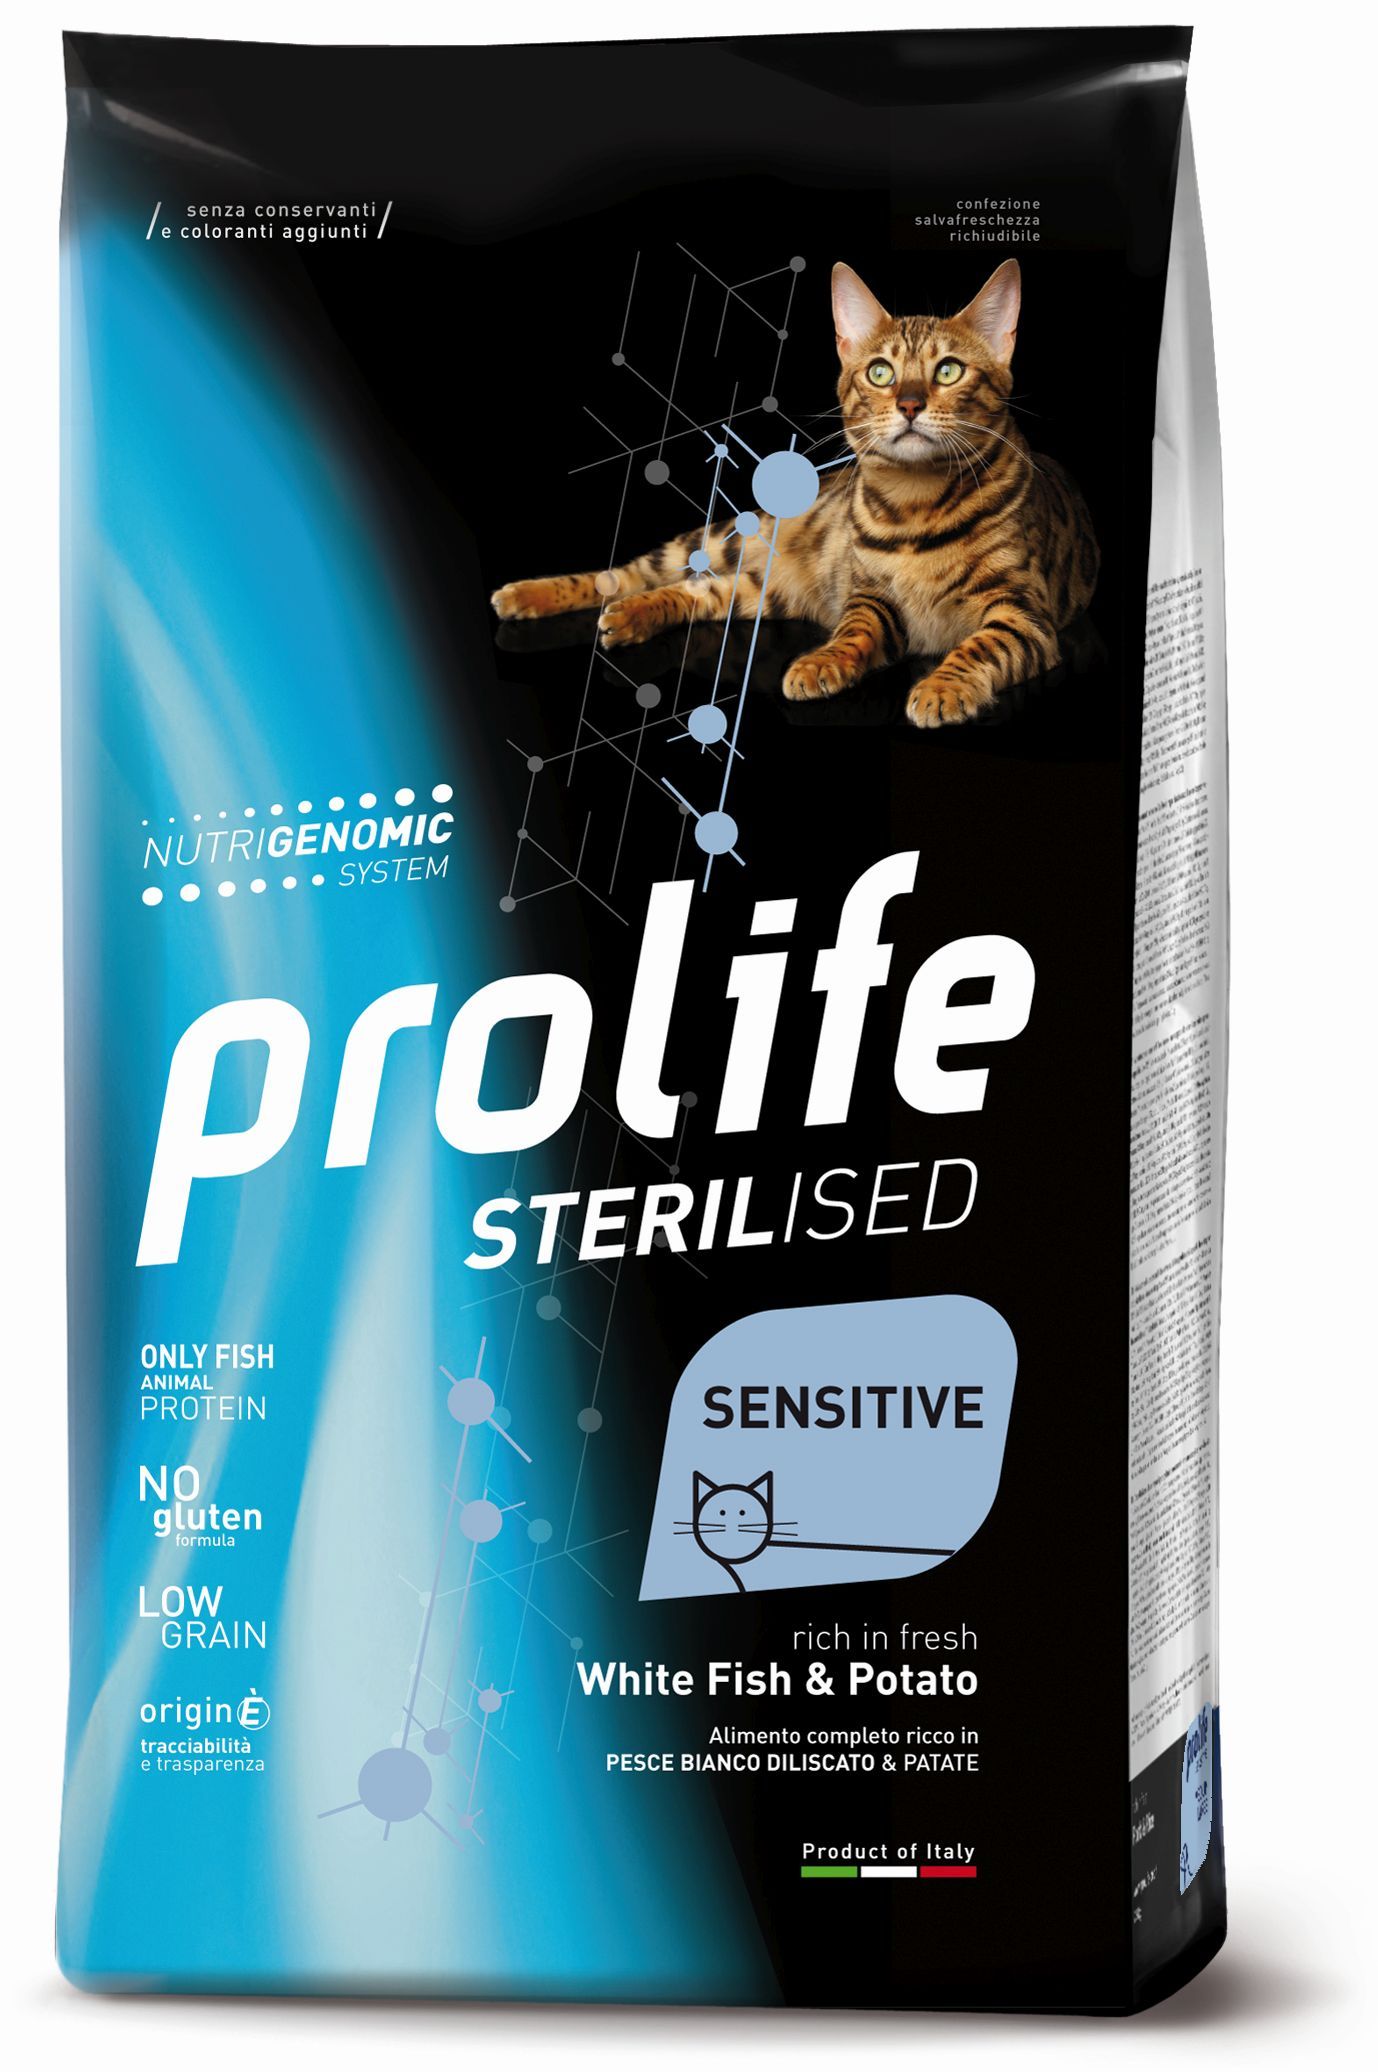 Complete pet food, rich in fresh deboned sole fish and potatoes.
